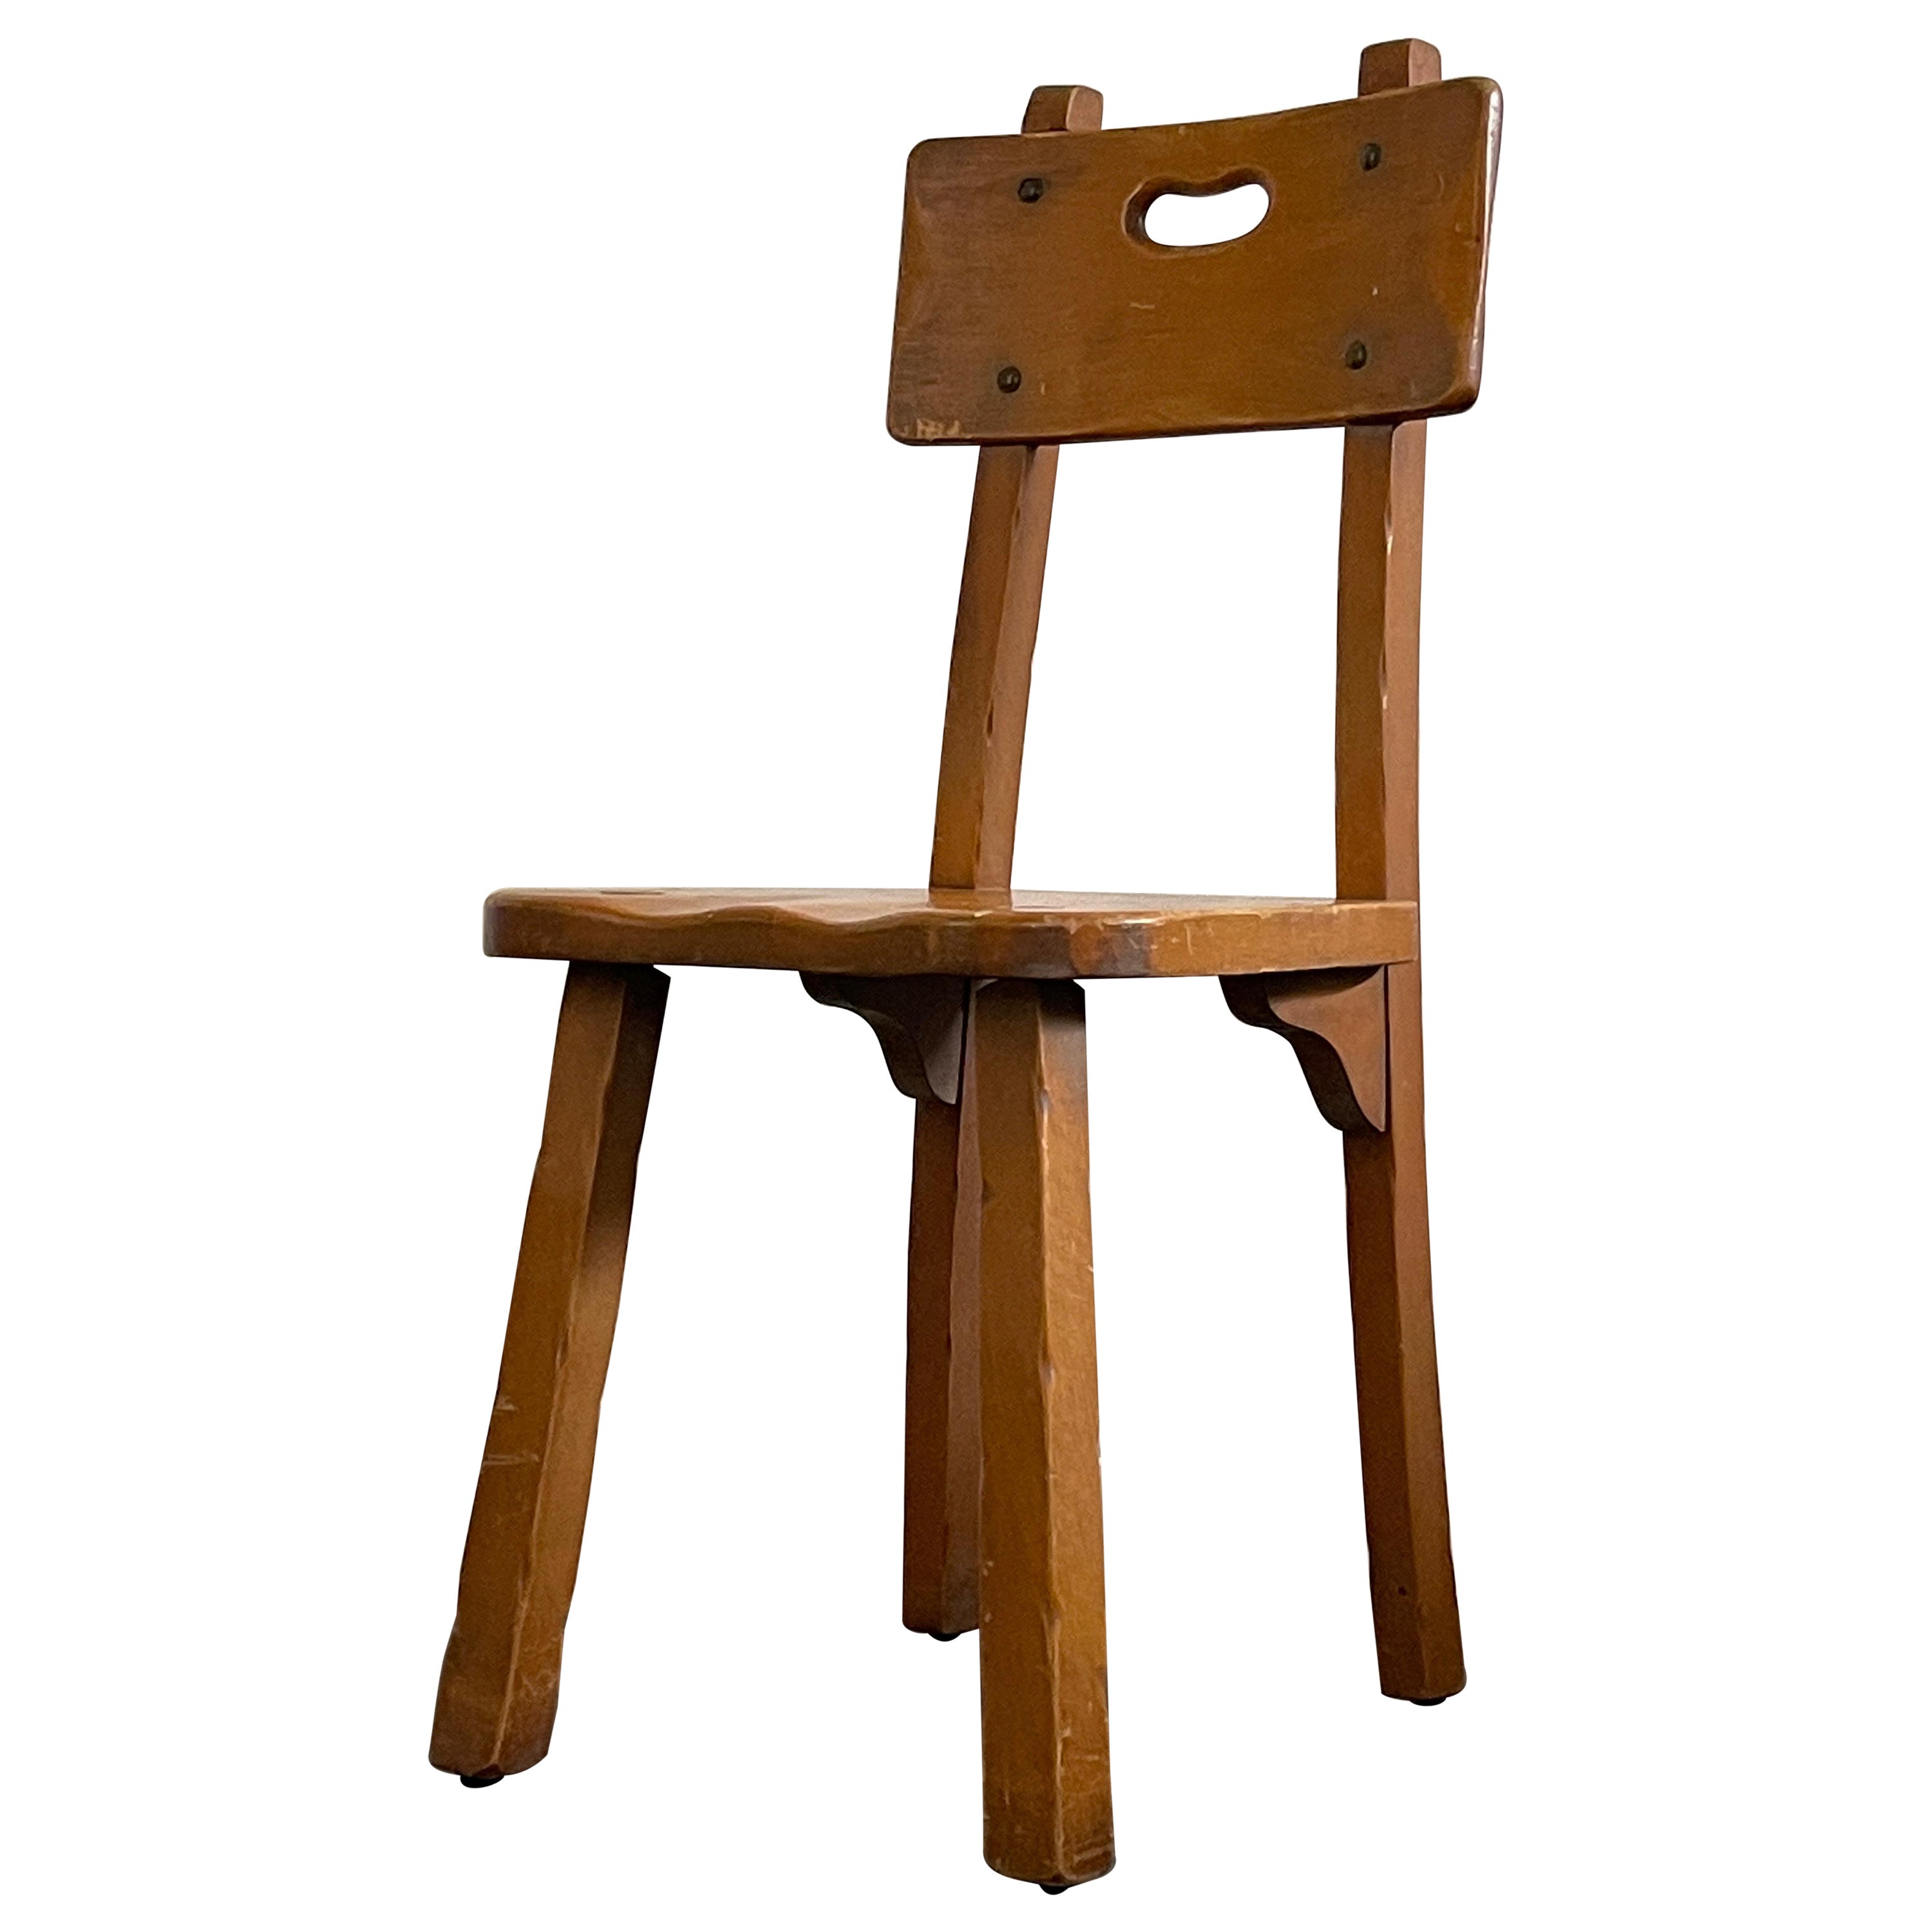 20th Century American Colonial Wood Chair